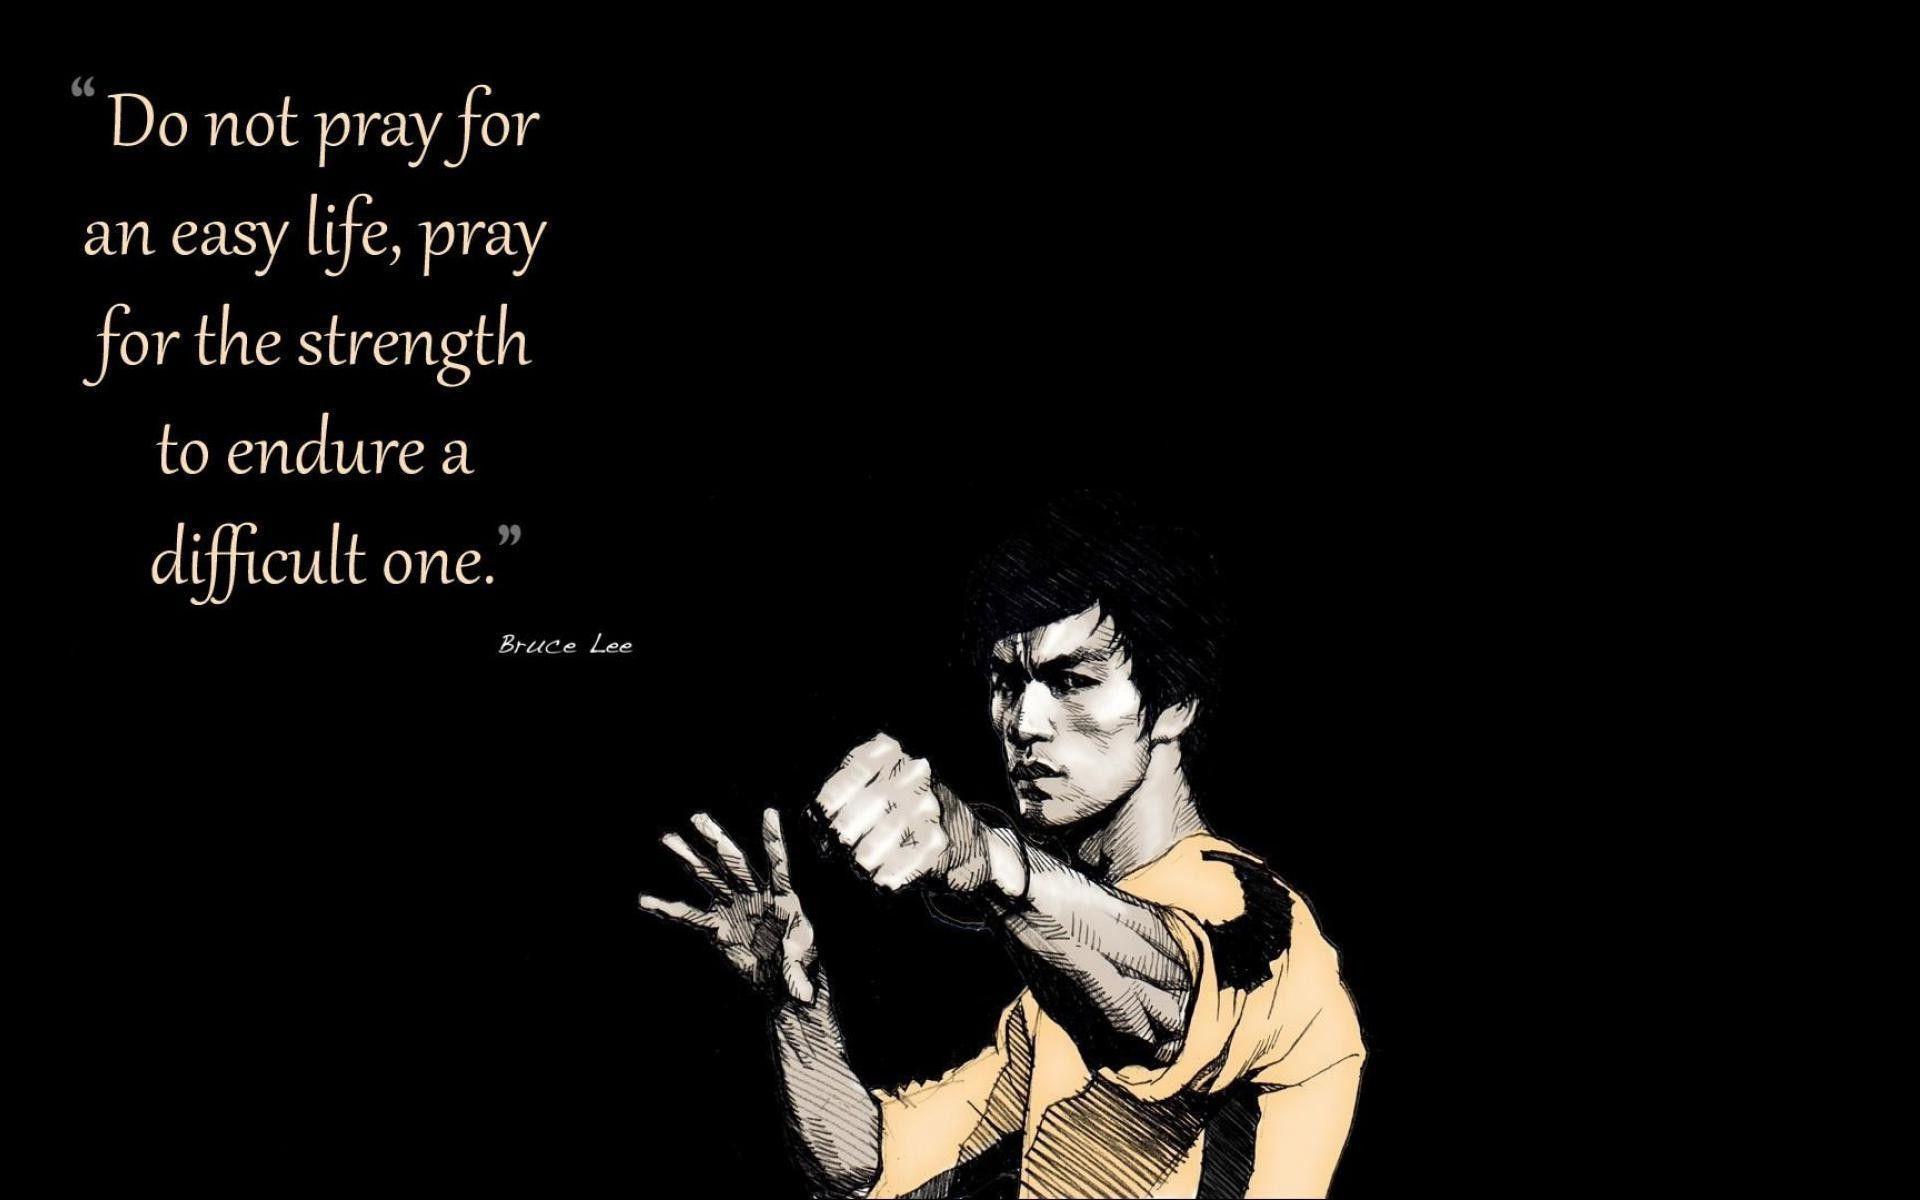 Best Quotes By Bruce Lee1. Wallpaper55.com